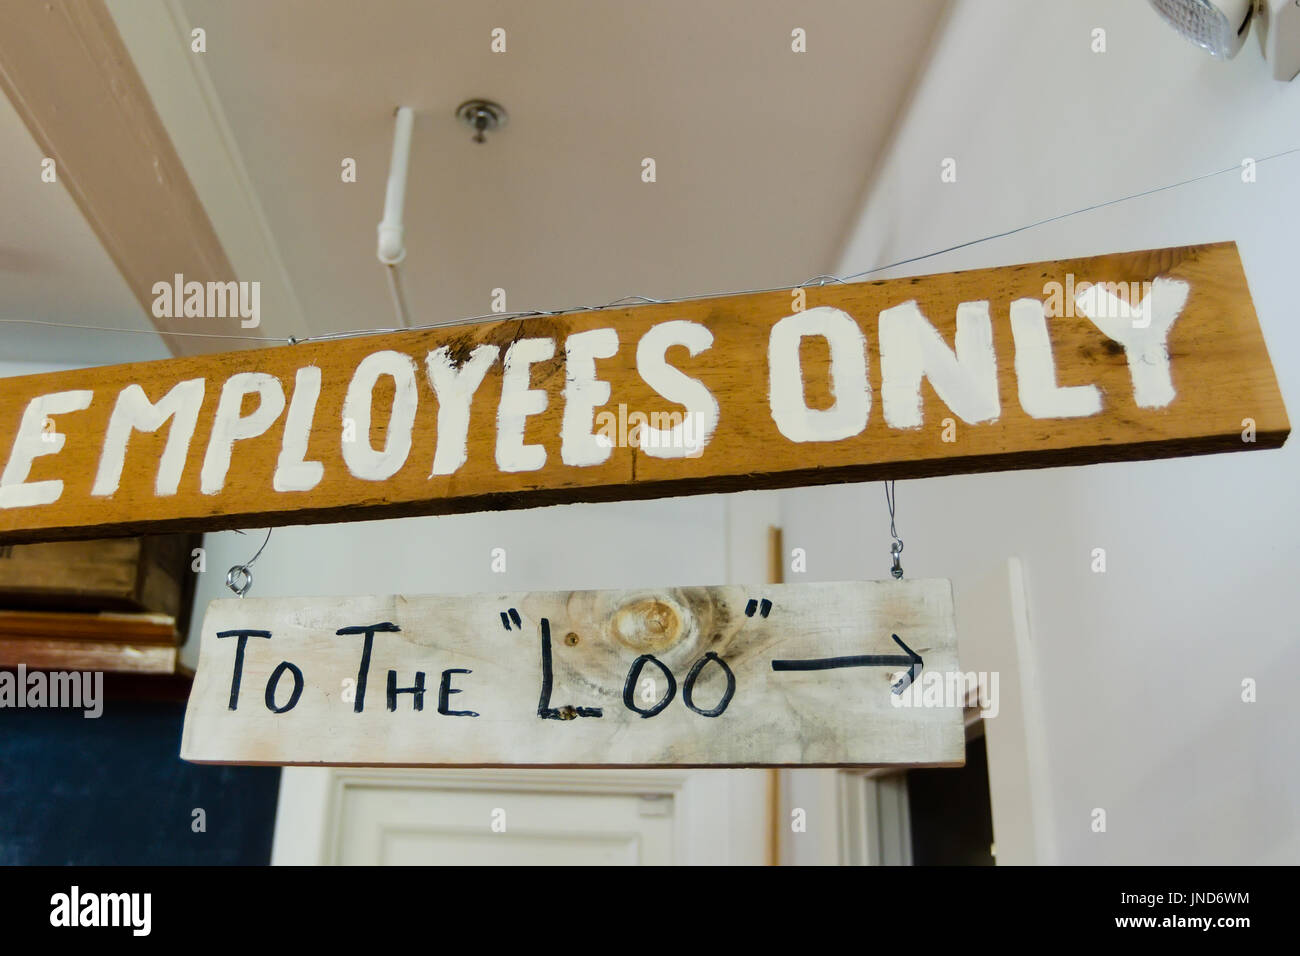 Wooden signs 'Employees Only' and 'To The Loo' hanging from ceiling Stock Photo